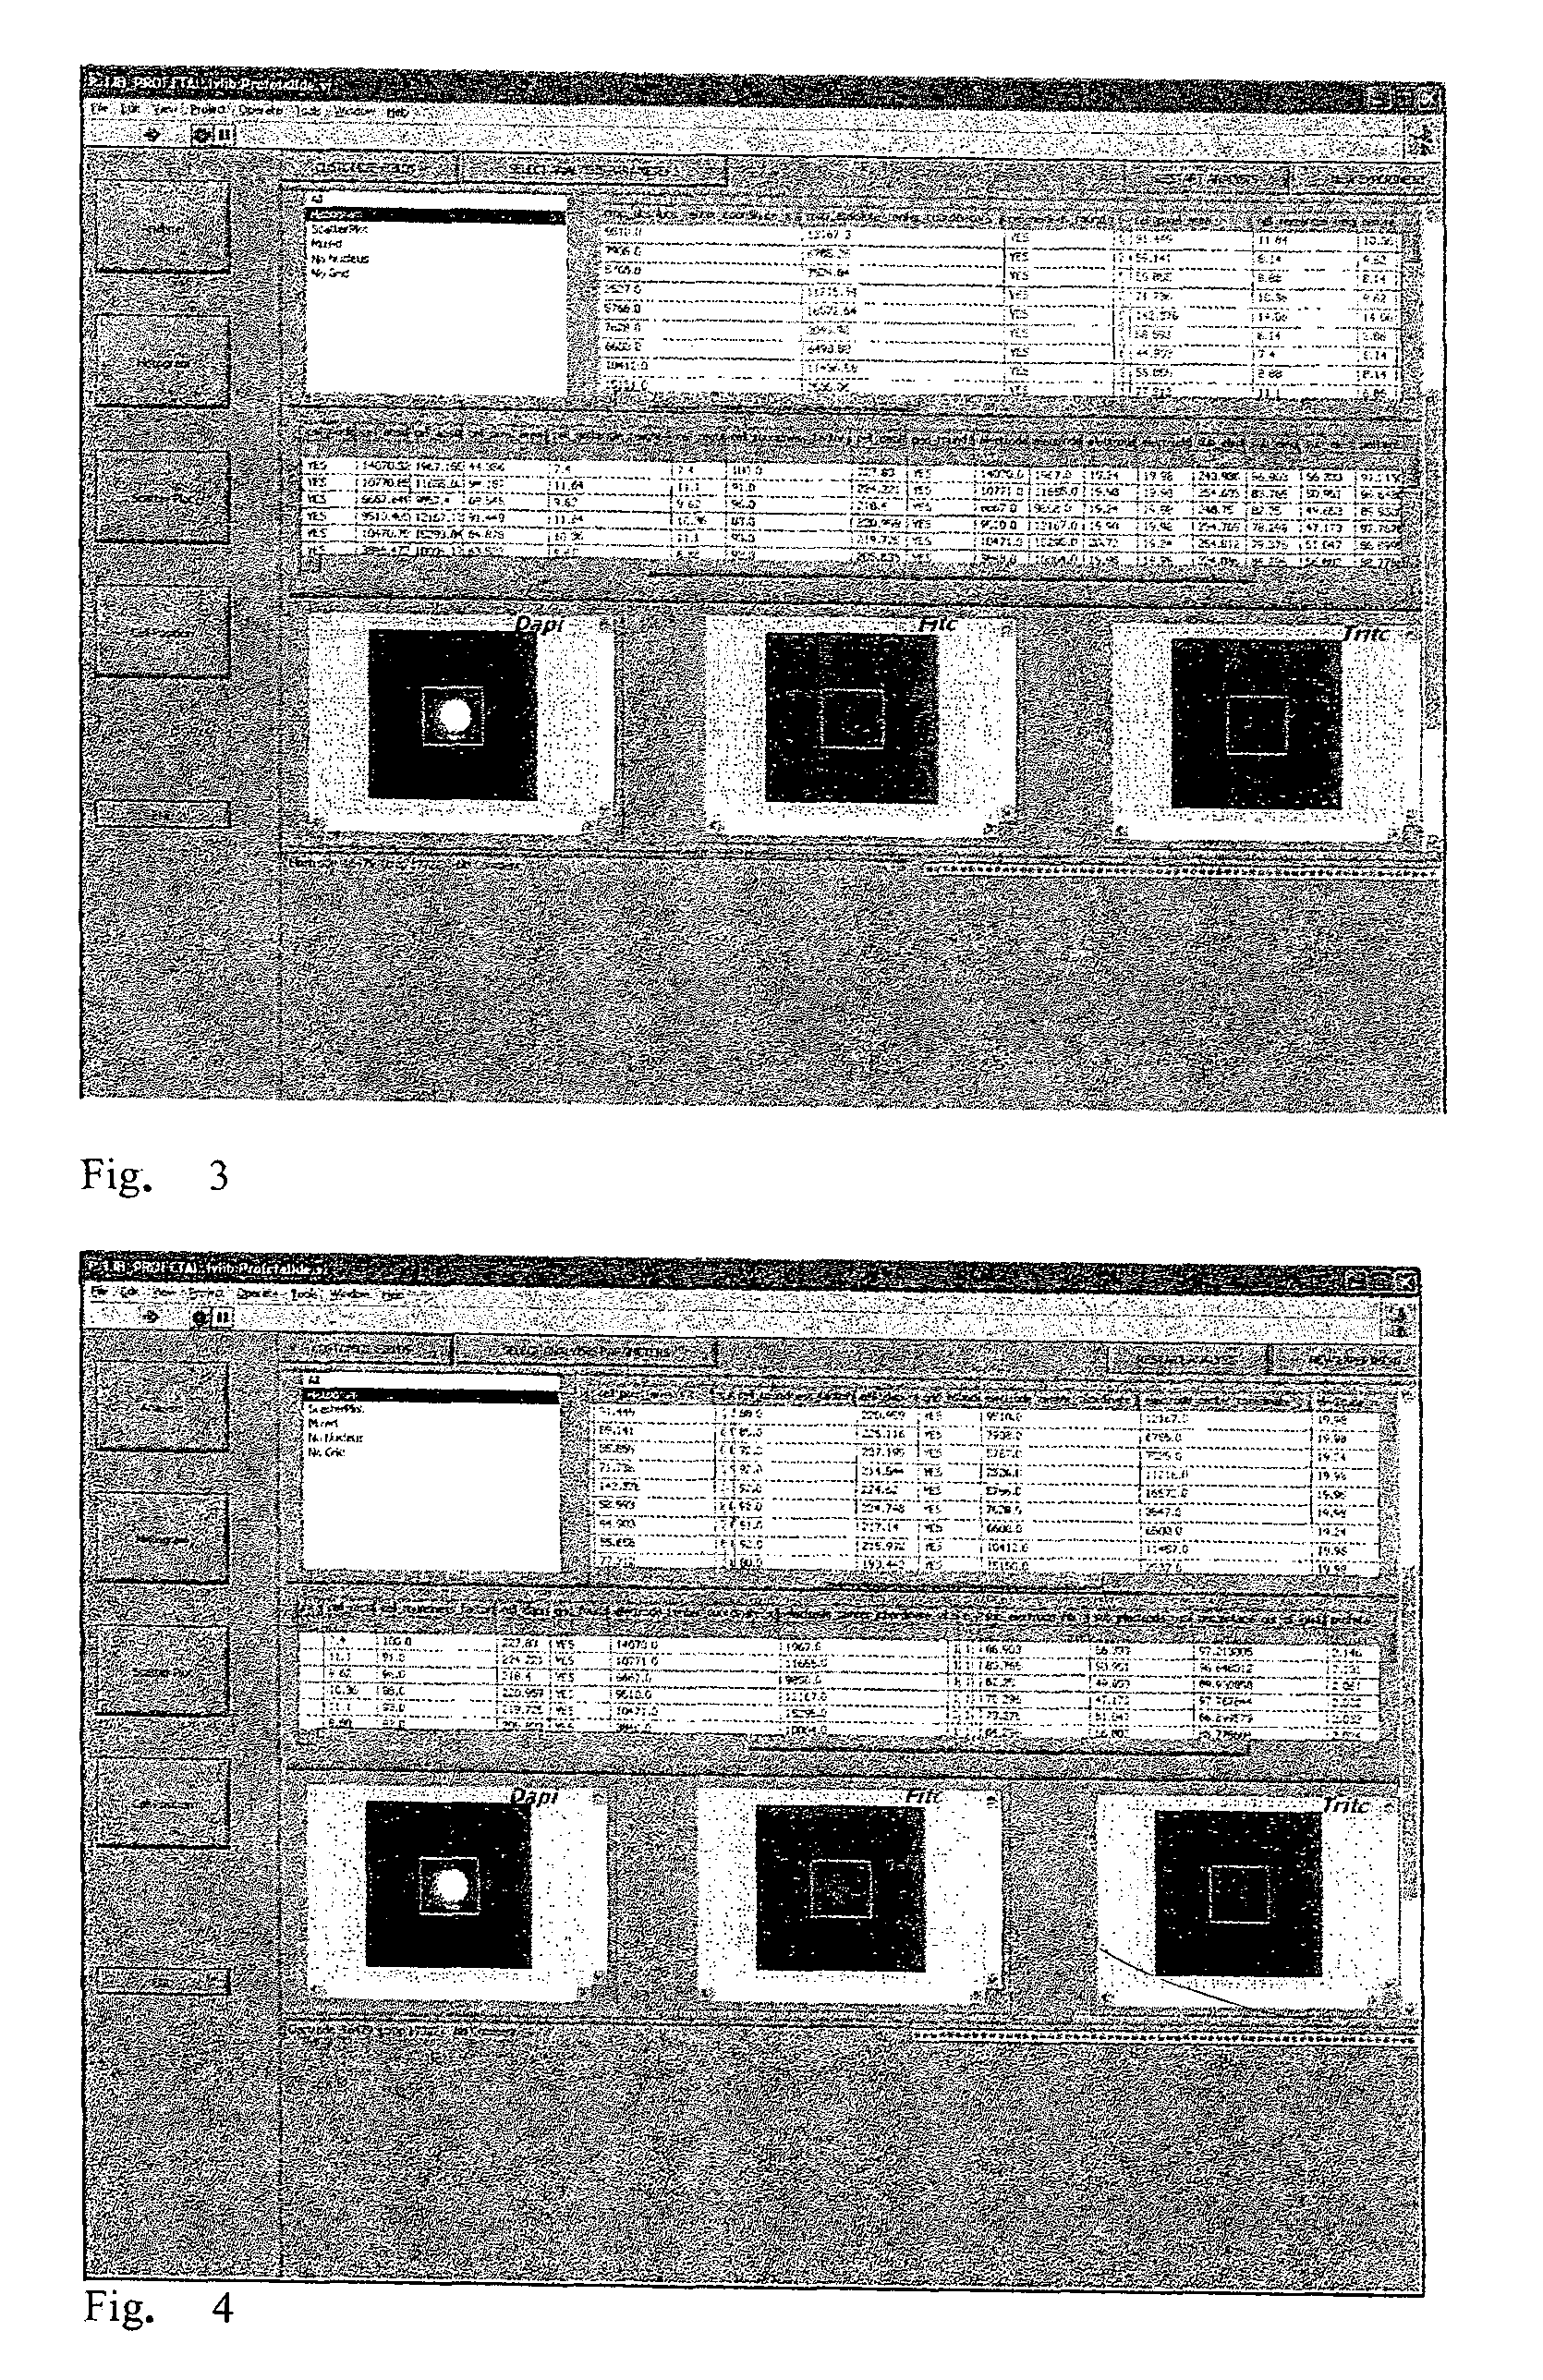 Method and apparatus for the identification and handling of particles